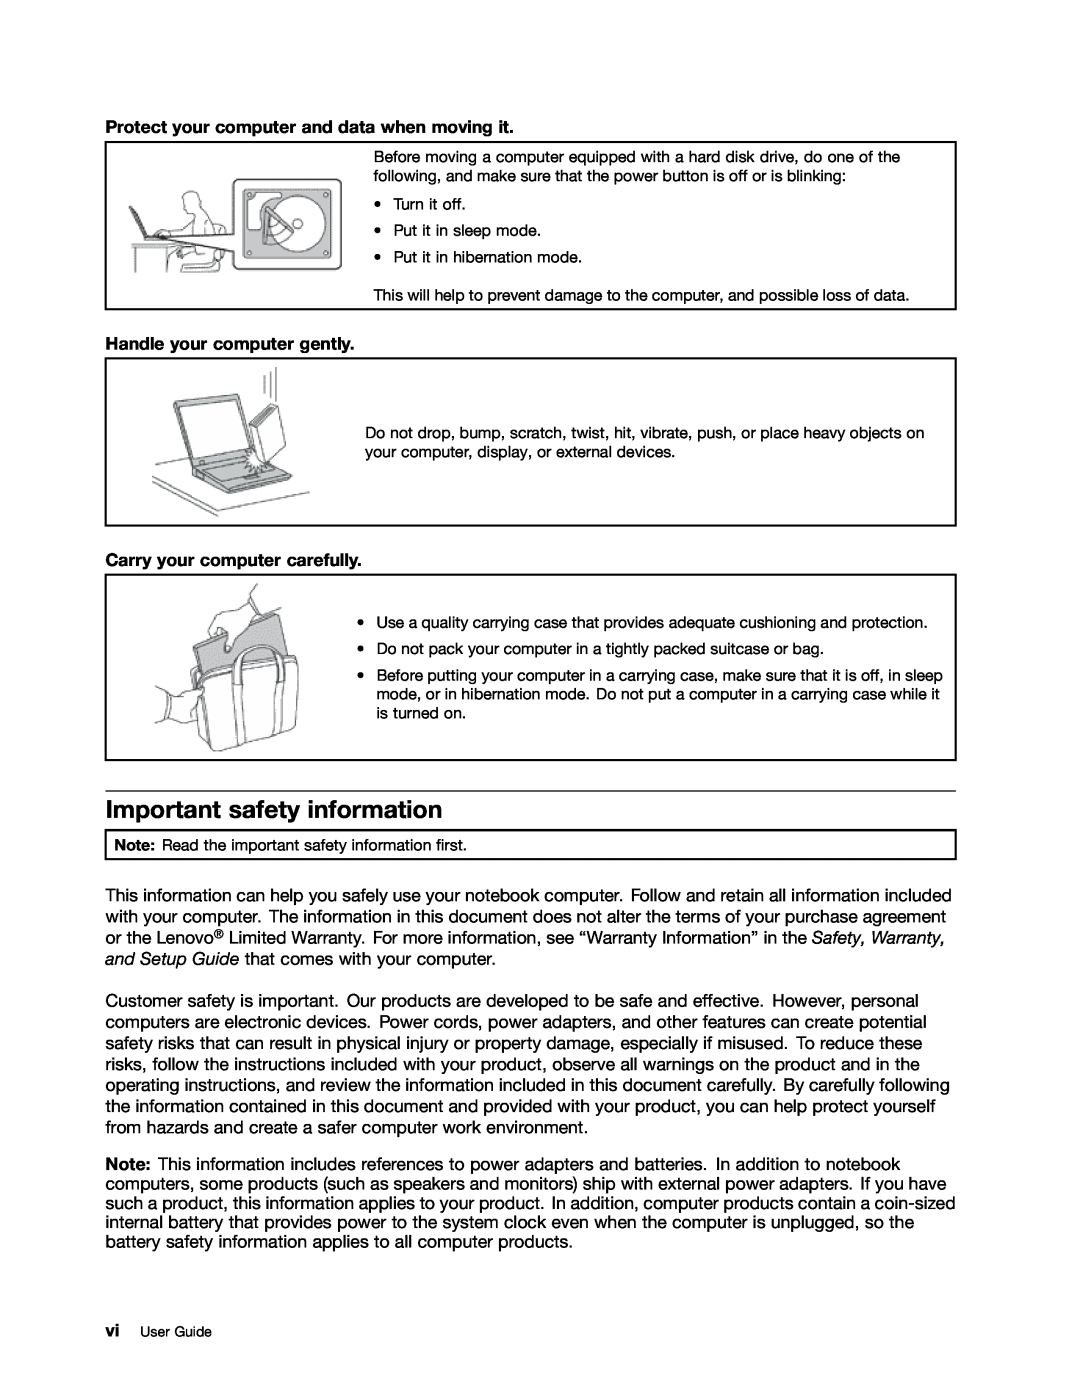 Lenovo 20AQ006HUS Important safety information, Protect your computer and data when moving it, Handle your computer gently 